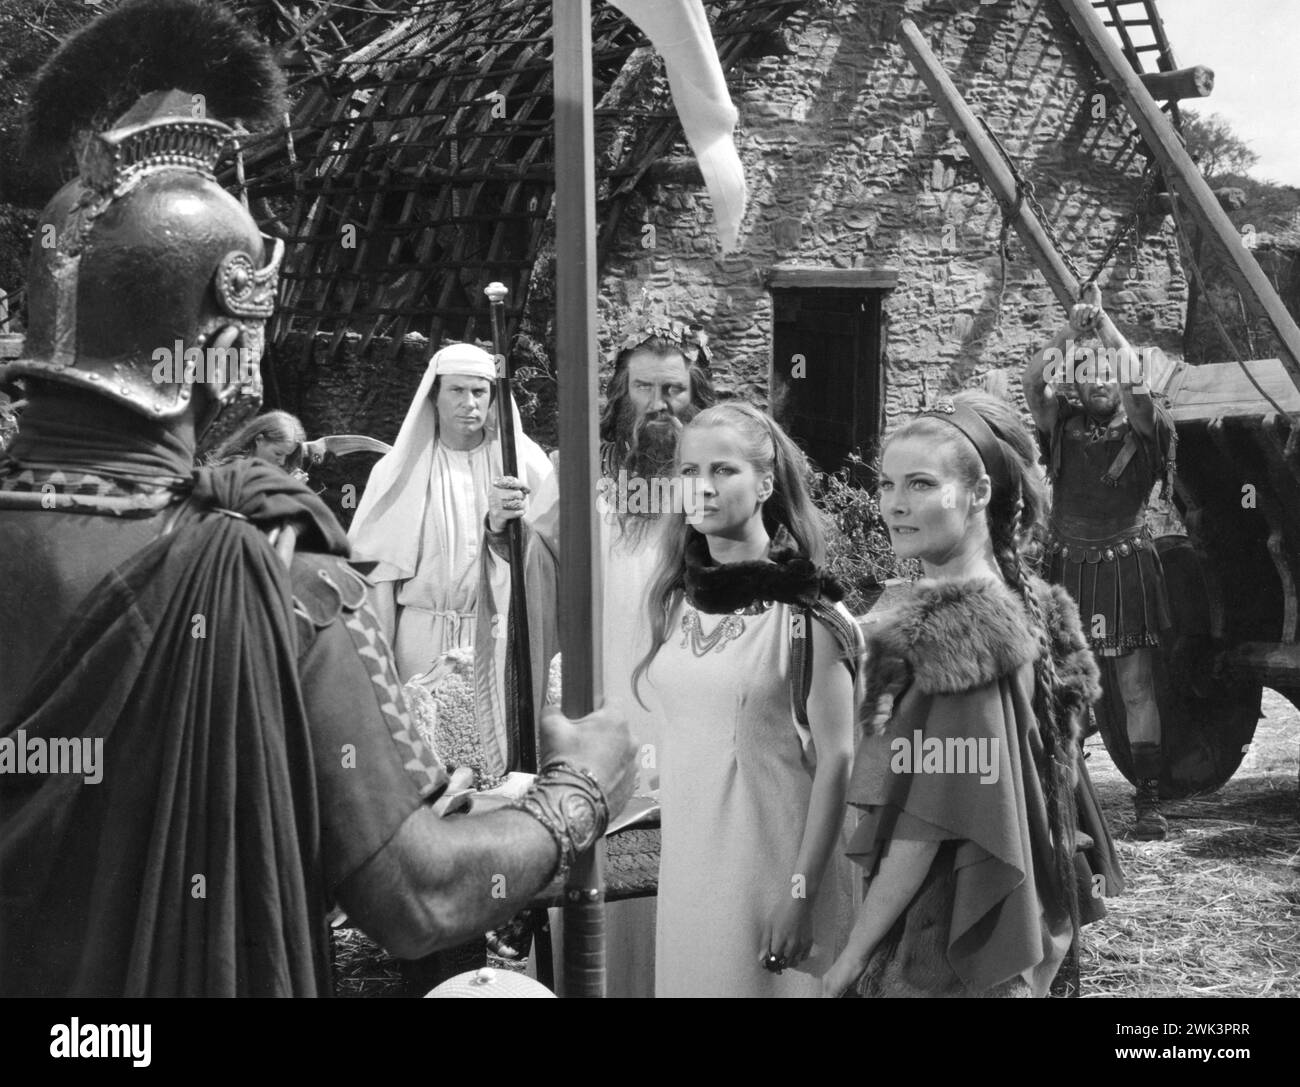 CARITA and ADRIENNE CORRI in a scene from THE VIKING QUEEN 1967 Director DON CHAFFEY Original Story JOHN TEMPLE-SMITH Costume Design JOHN FURNISS Music PHILIP MARTELL A Hammer Film Production / Warner-Pathe Stock Photo